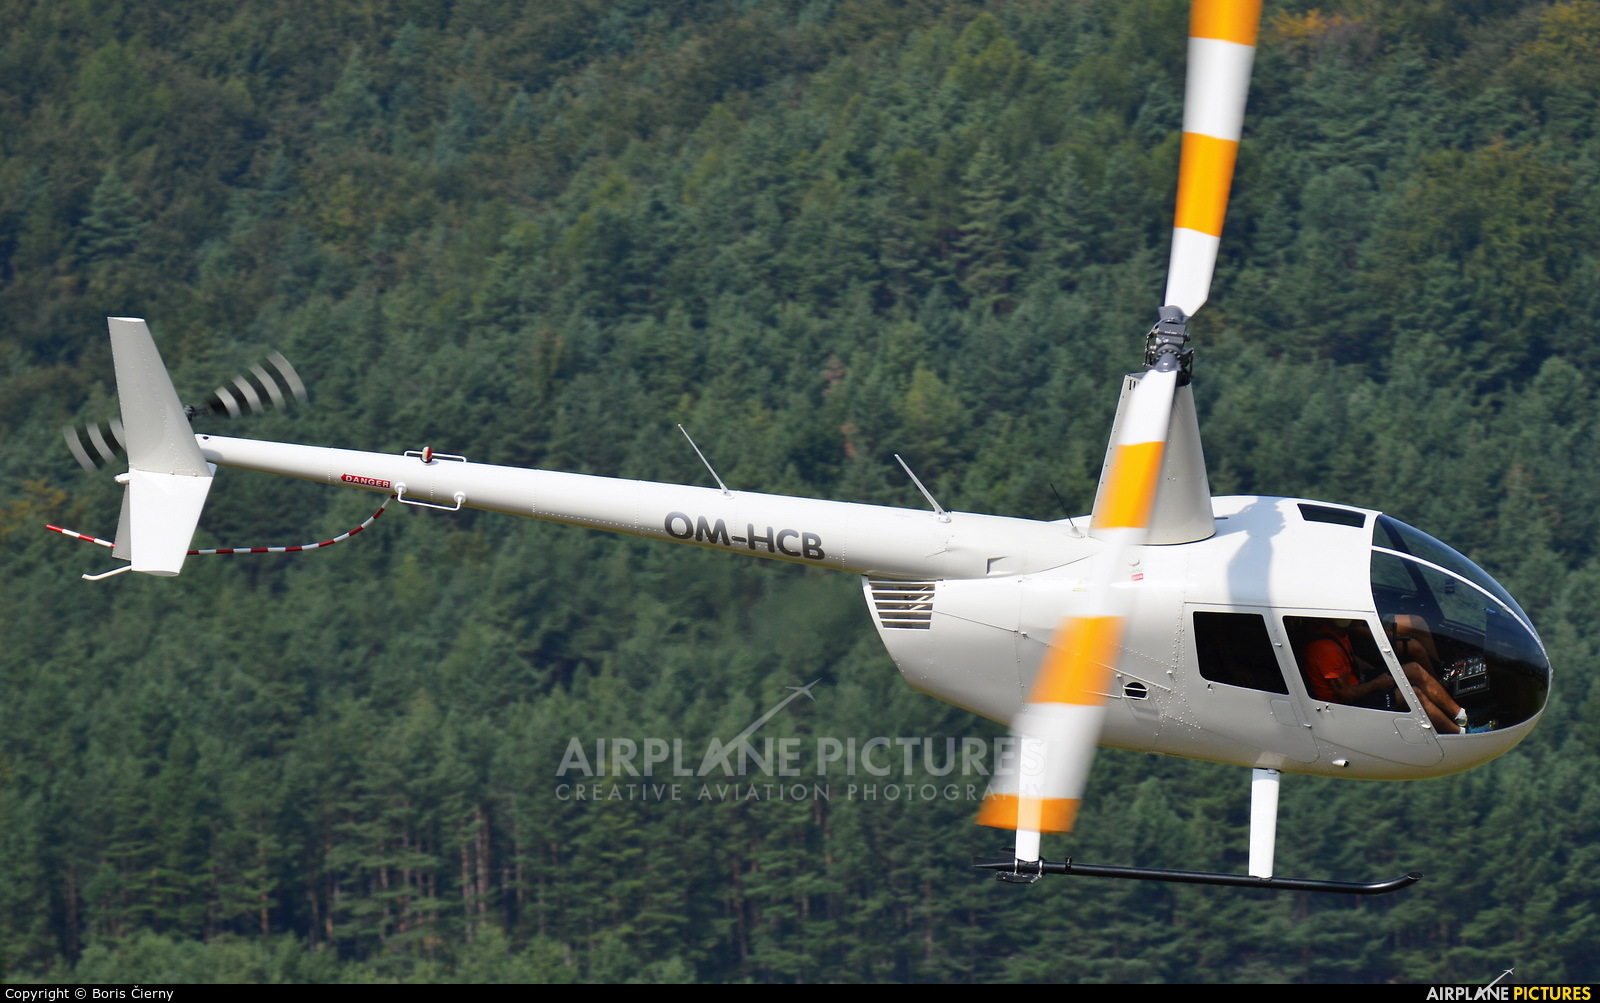 Private OM-HCB aircraft at Off Airport - Slovakia